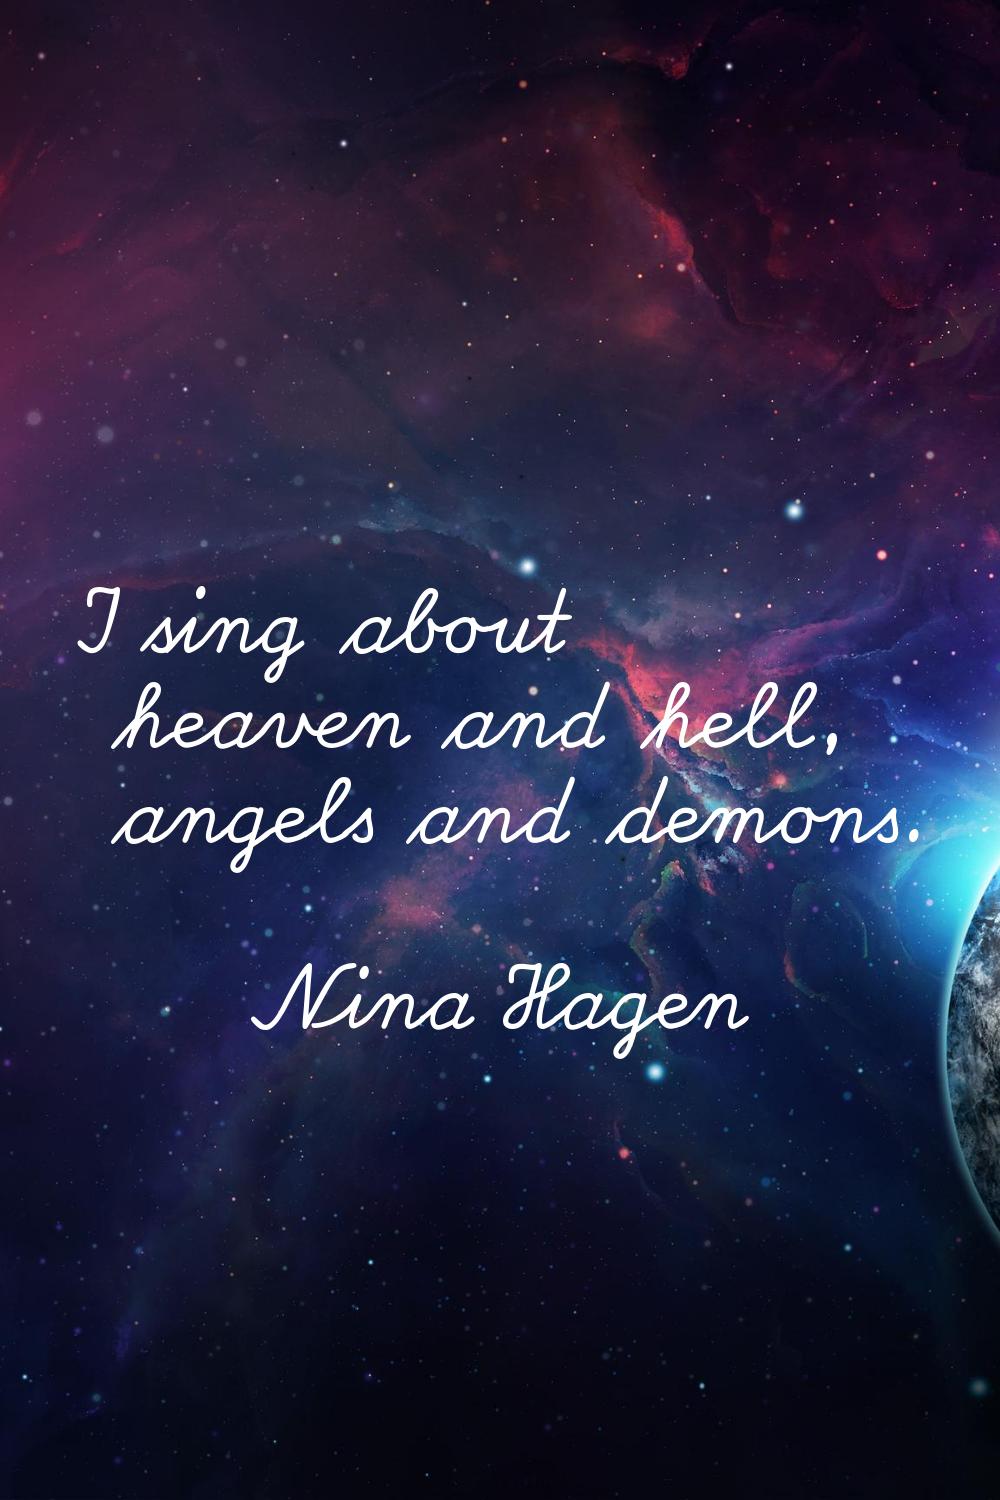 I sing about heaven and hell, angels and demons.